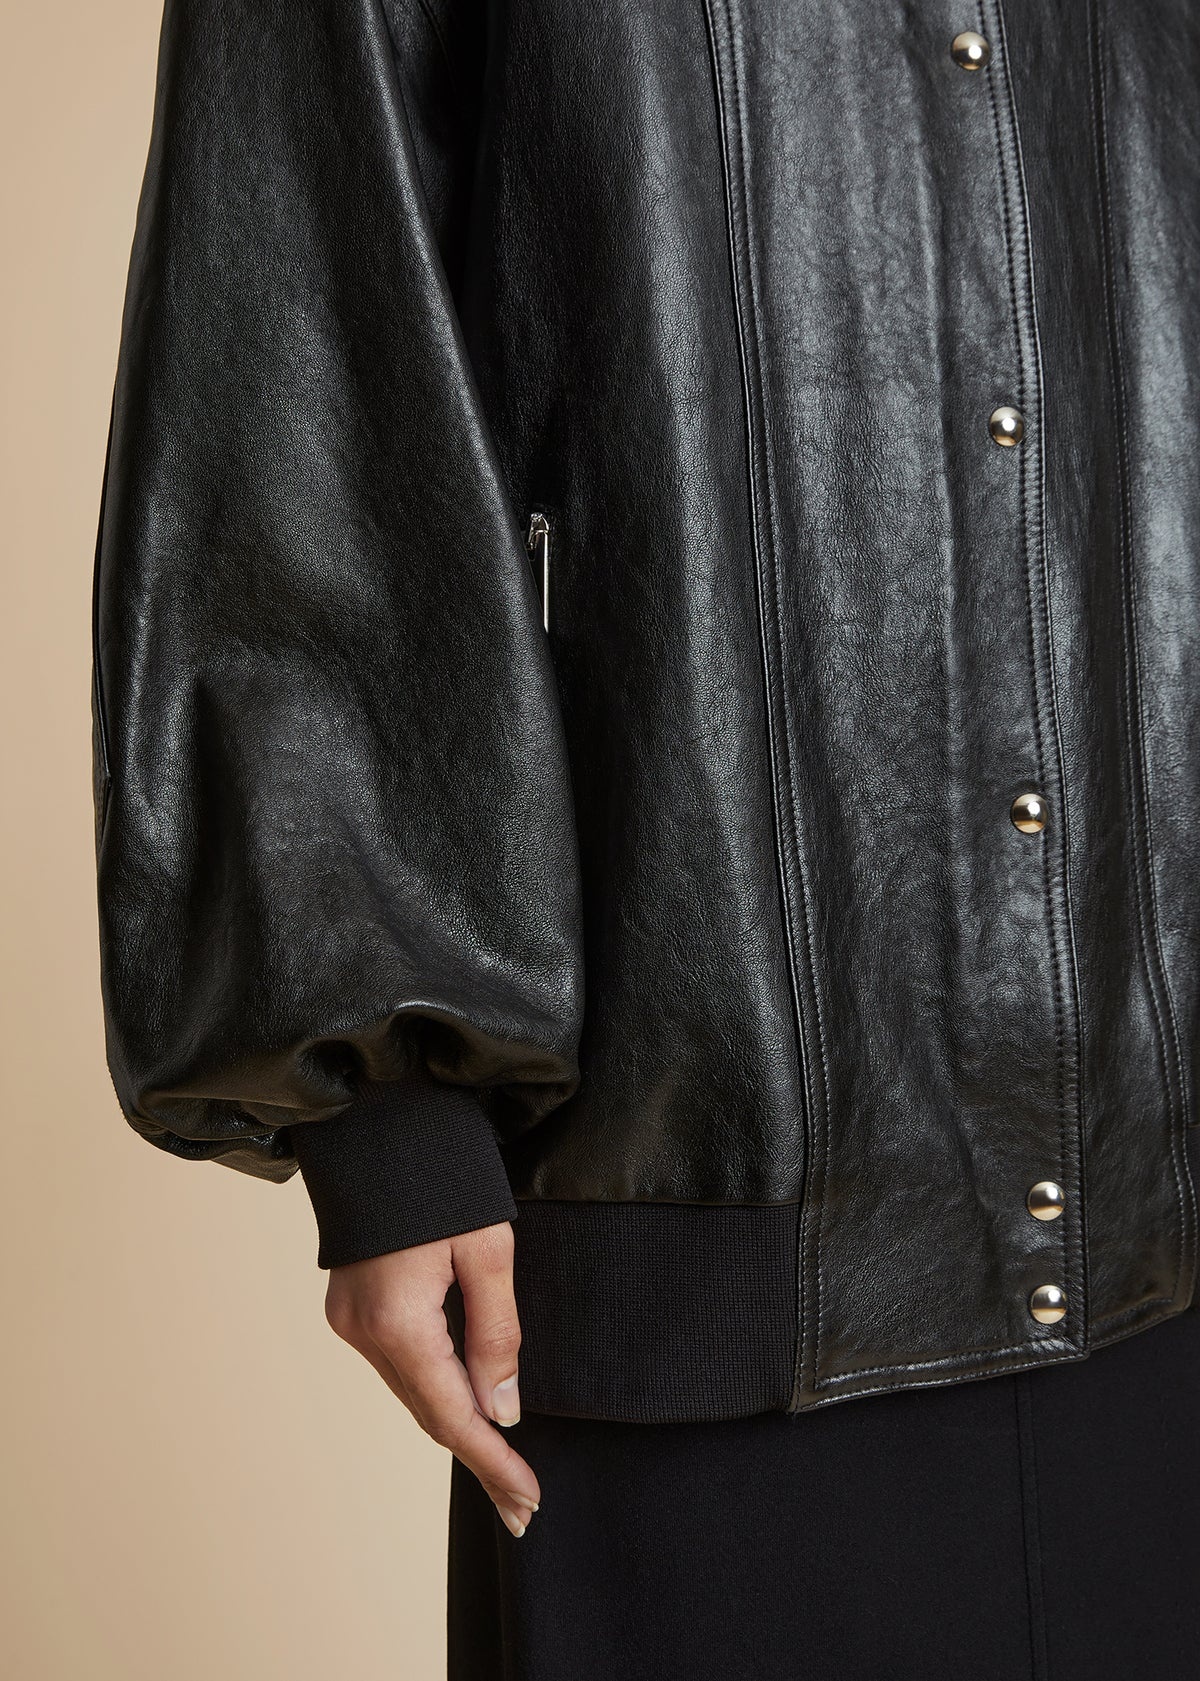 The Farris Jacket in Black Leather - 5